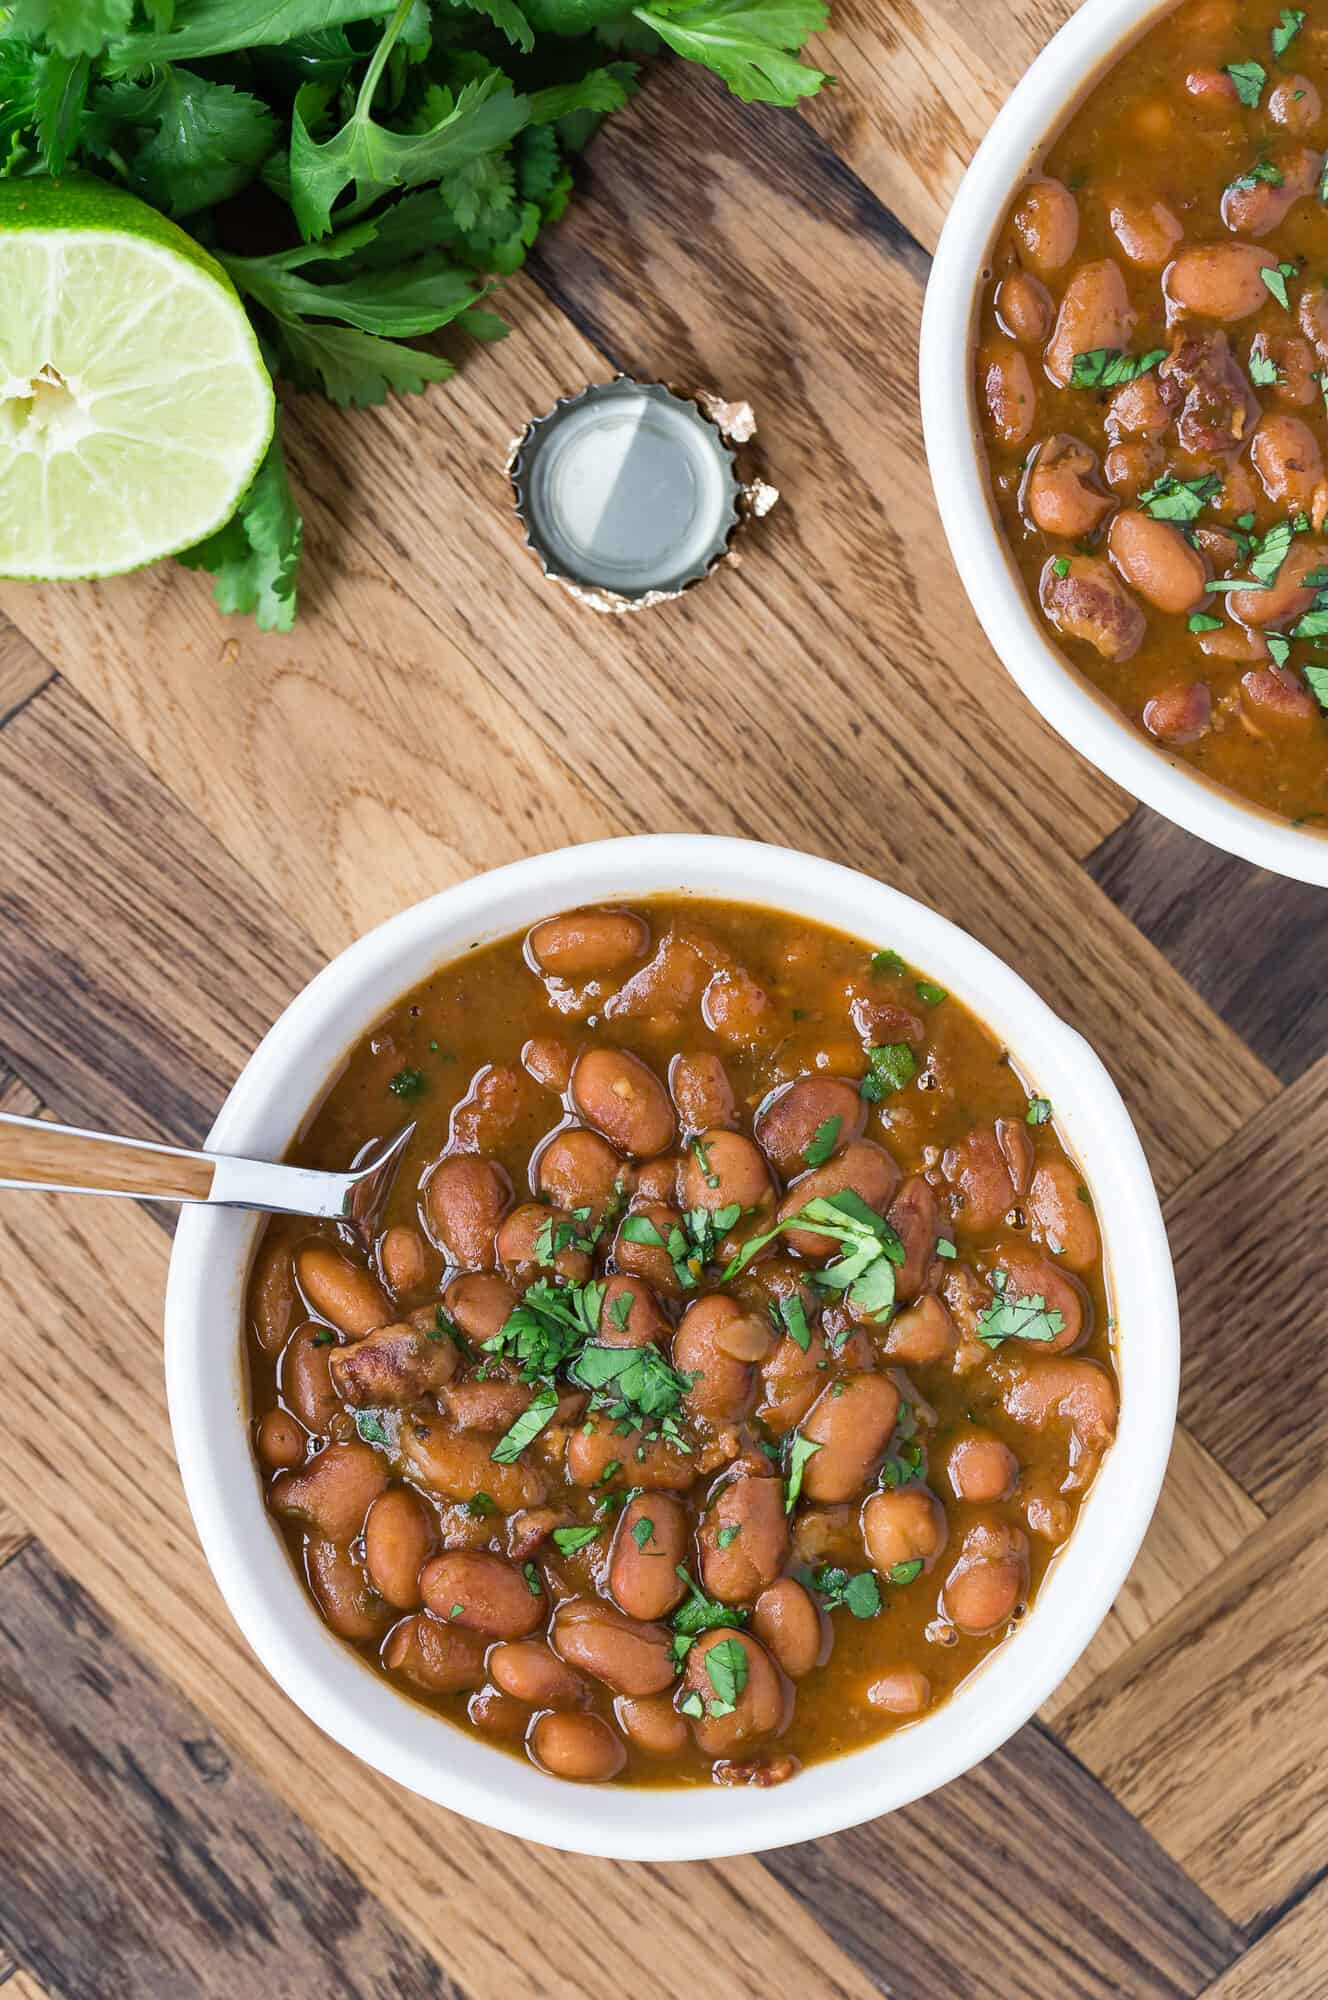 Two bowls of frijoles borrachos, garnished with cilantro.